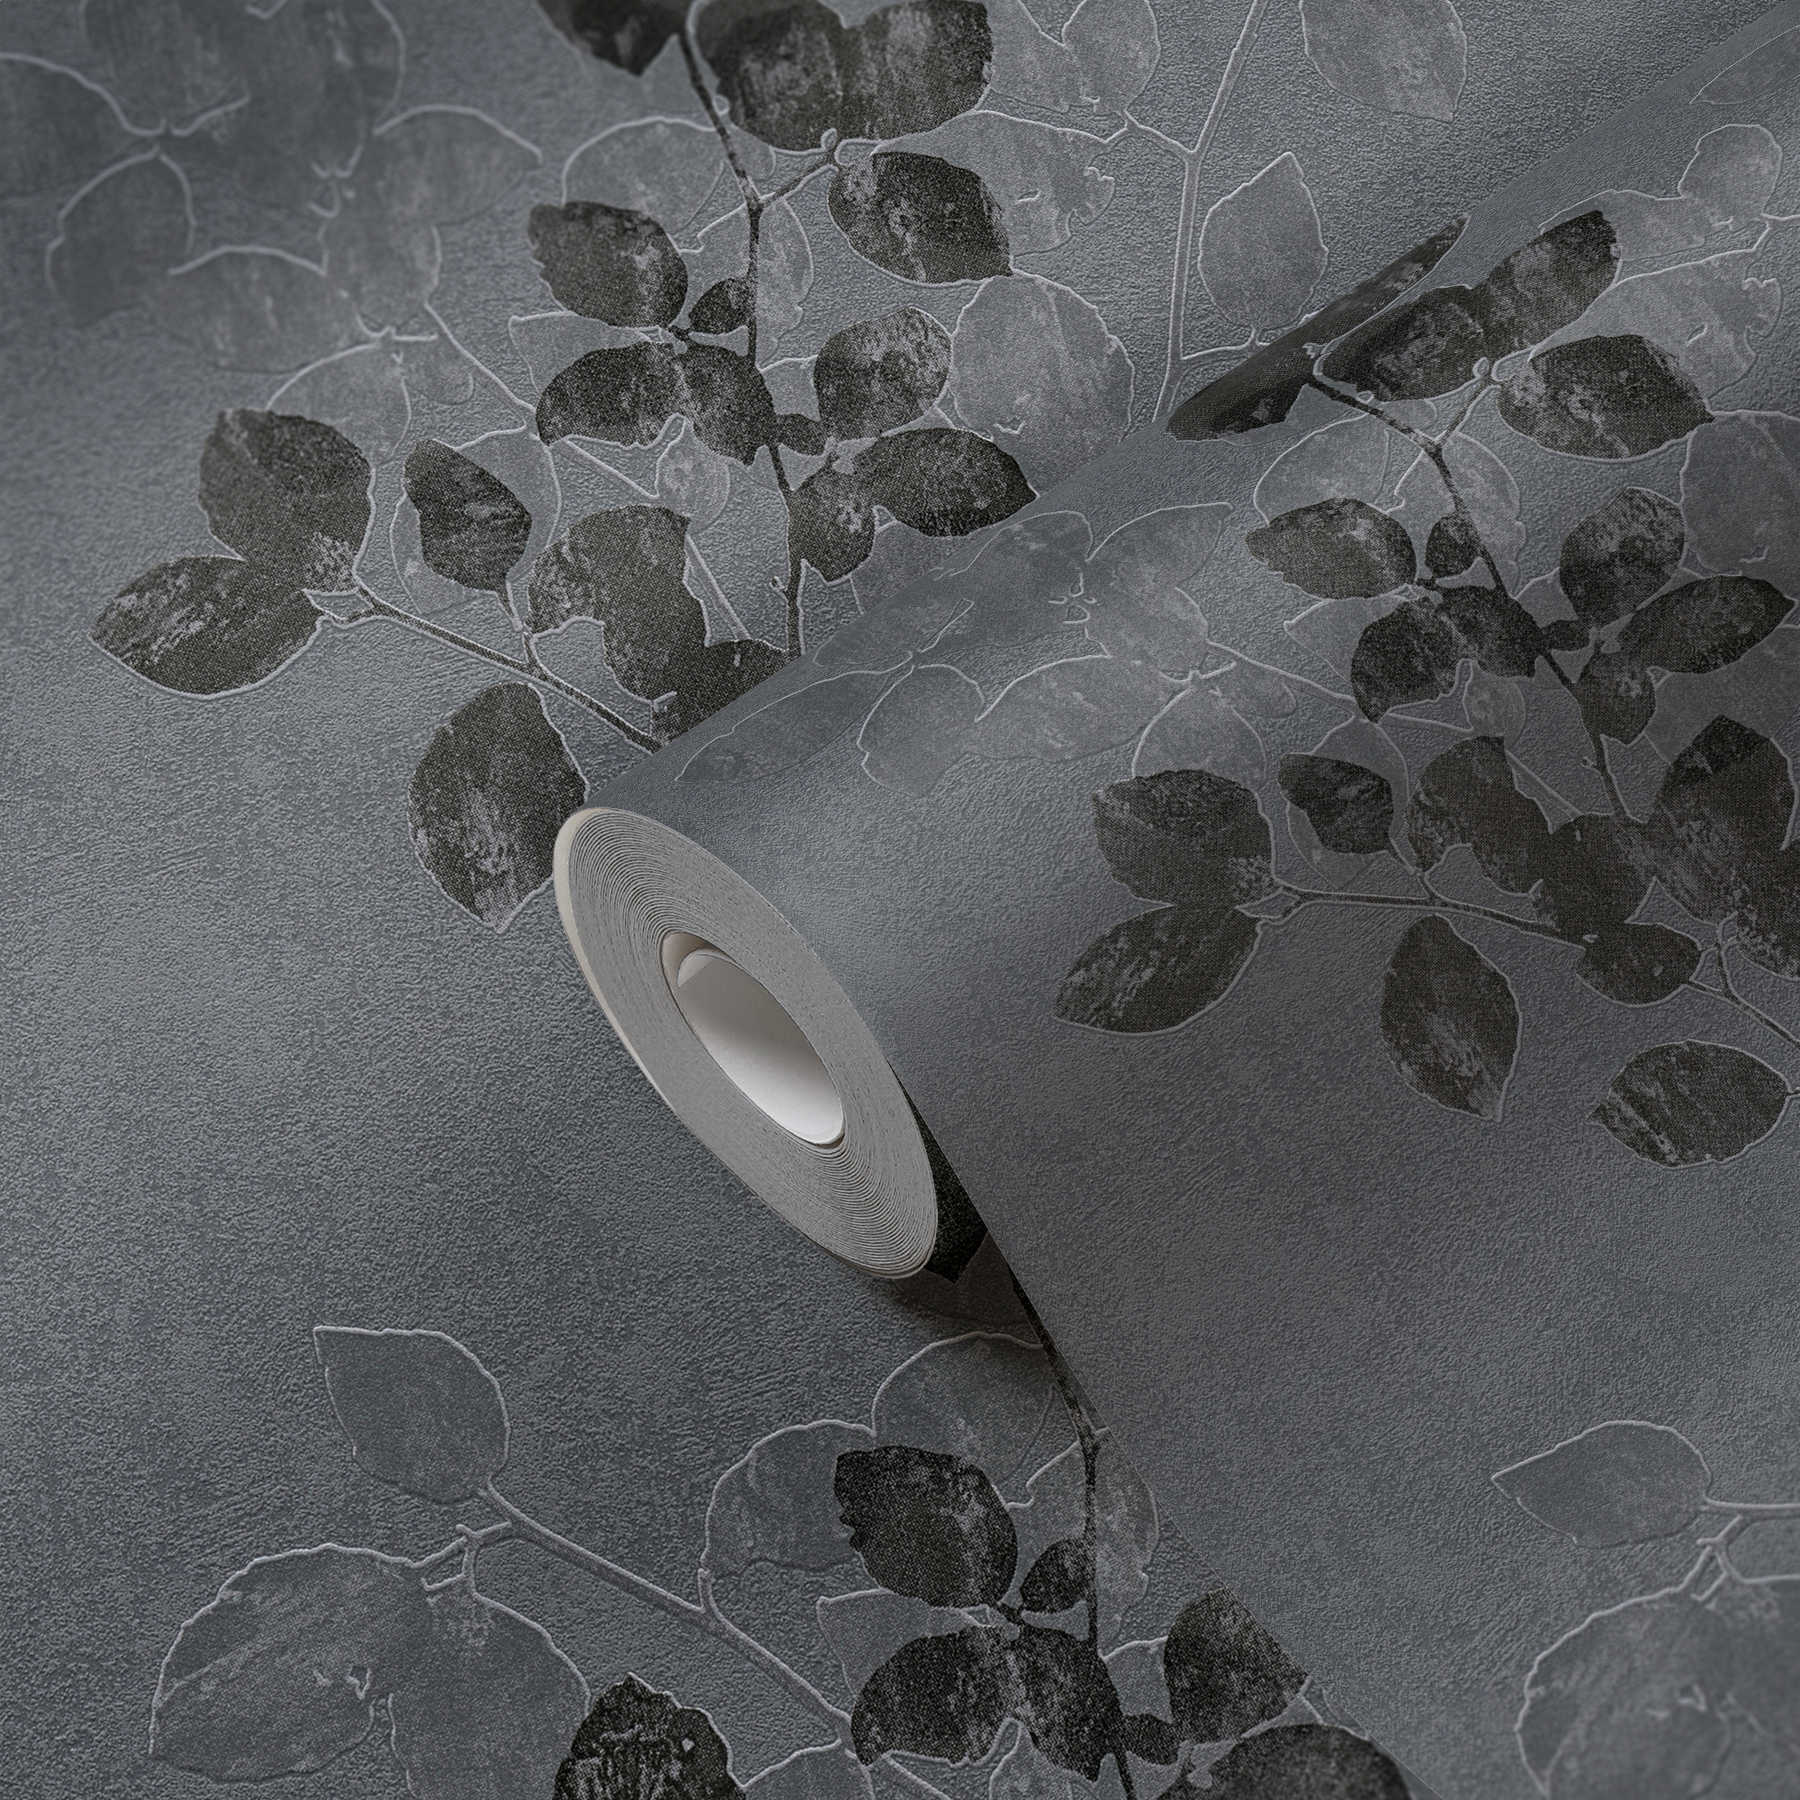             Textured wallpaper nature decor with foam & embossed pattern - grey
        